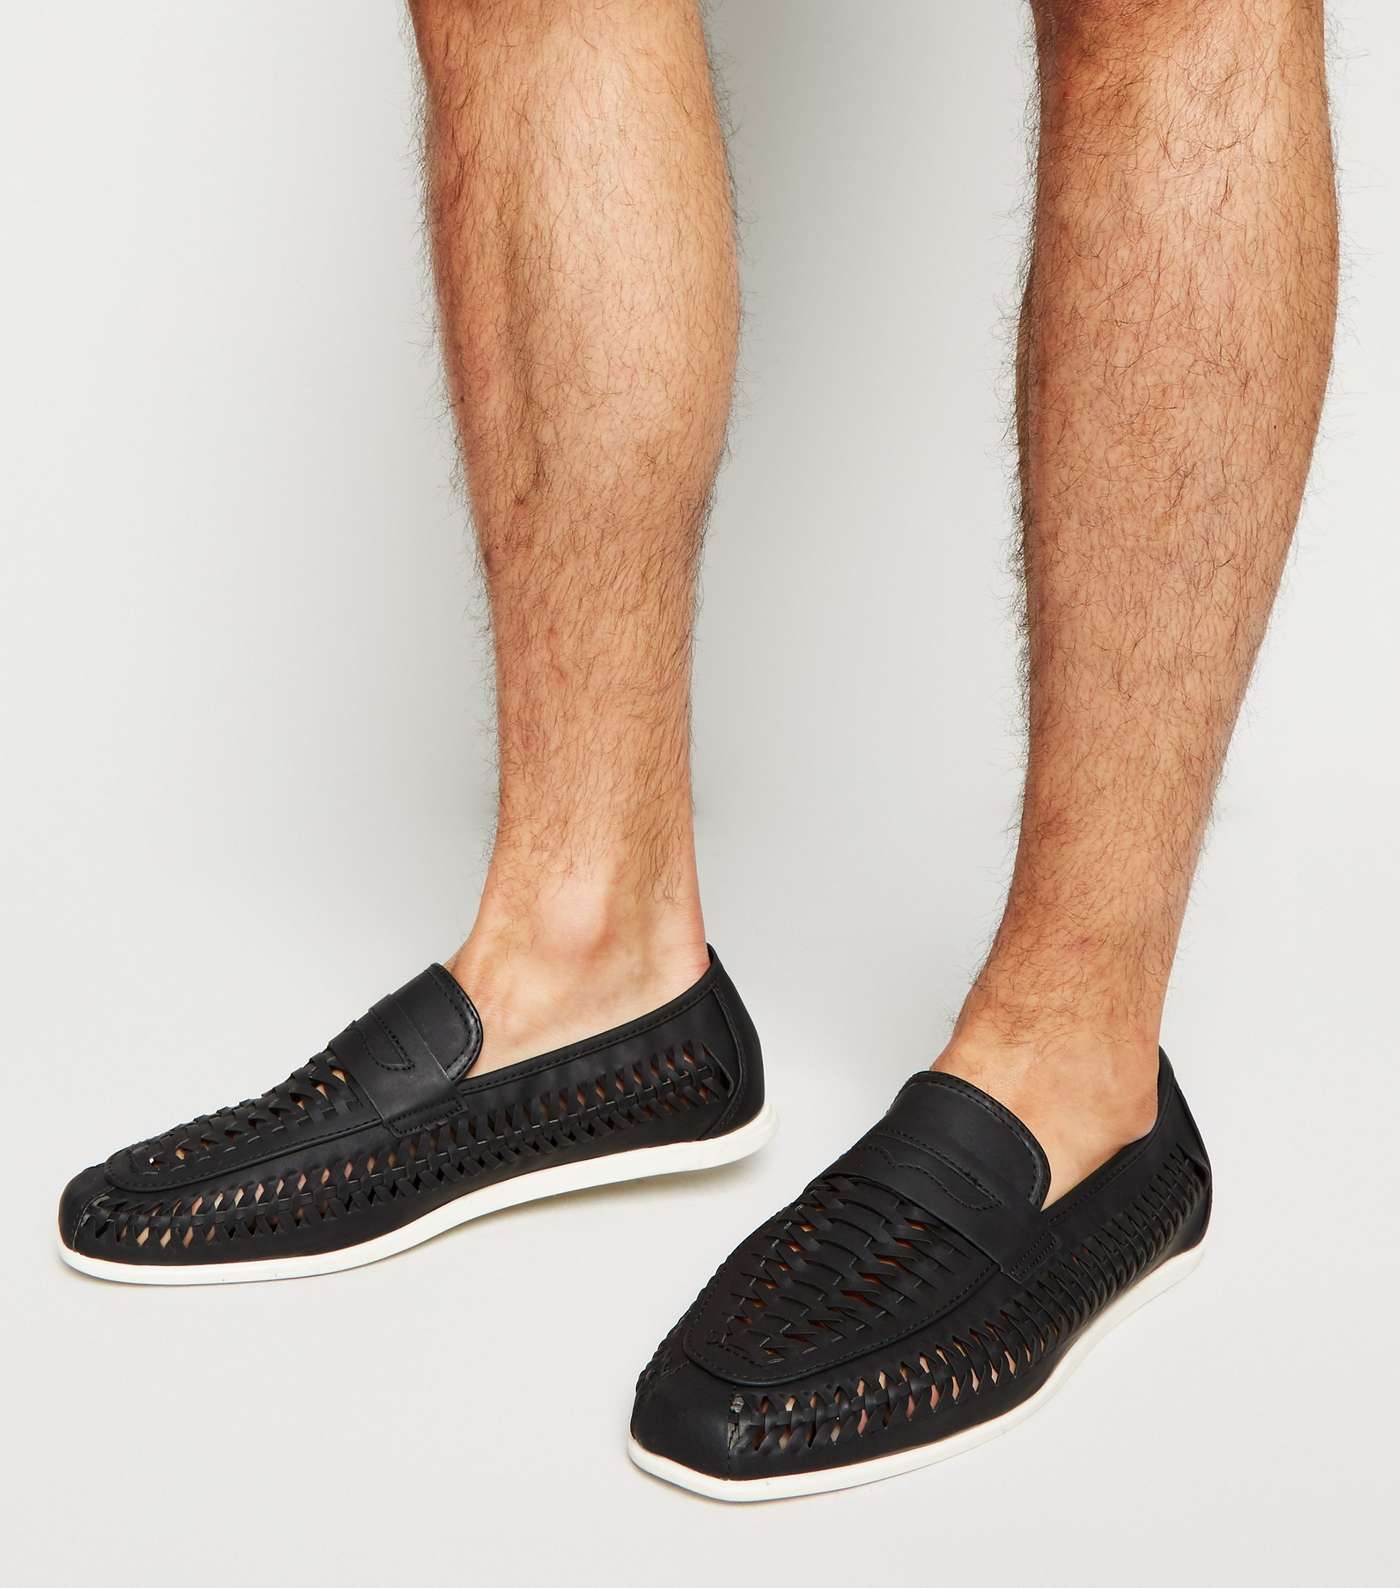 Black Leather-Look Woven Loafers Image 2